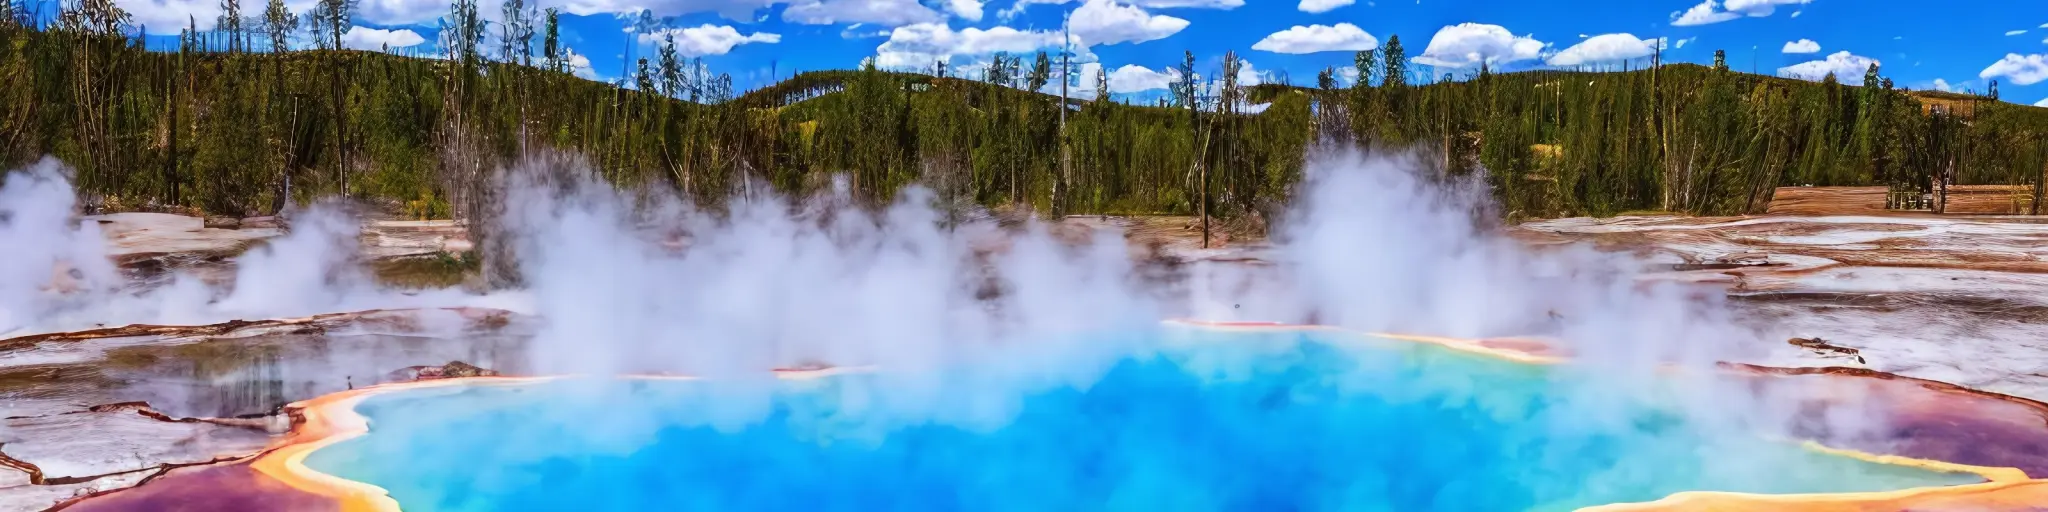 Colorful pool in the national park with smoke rising above it